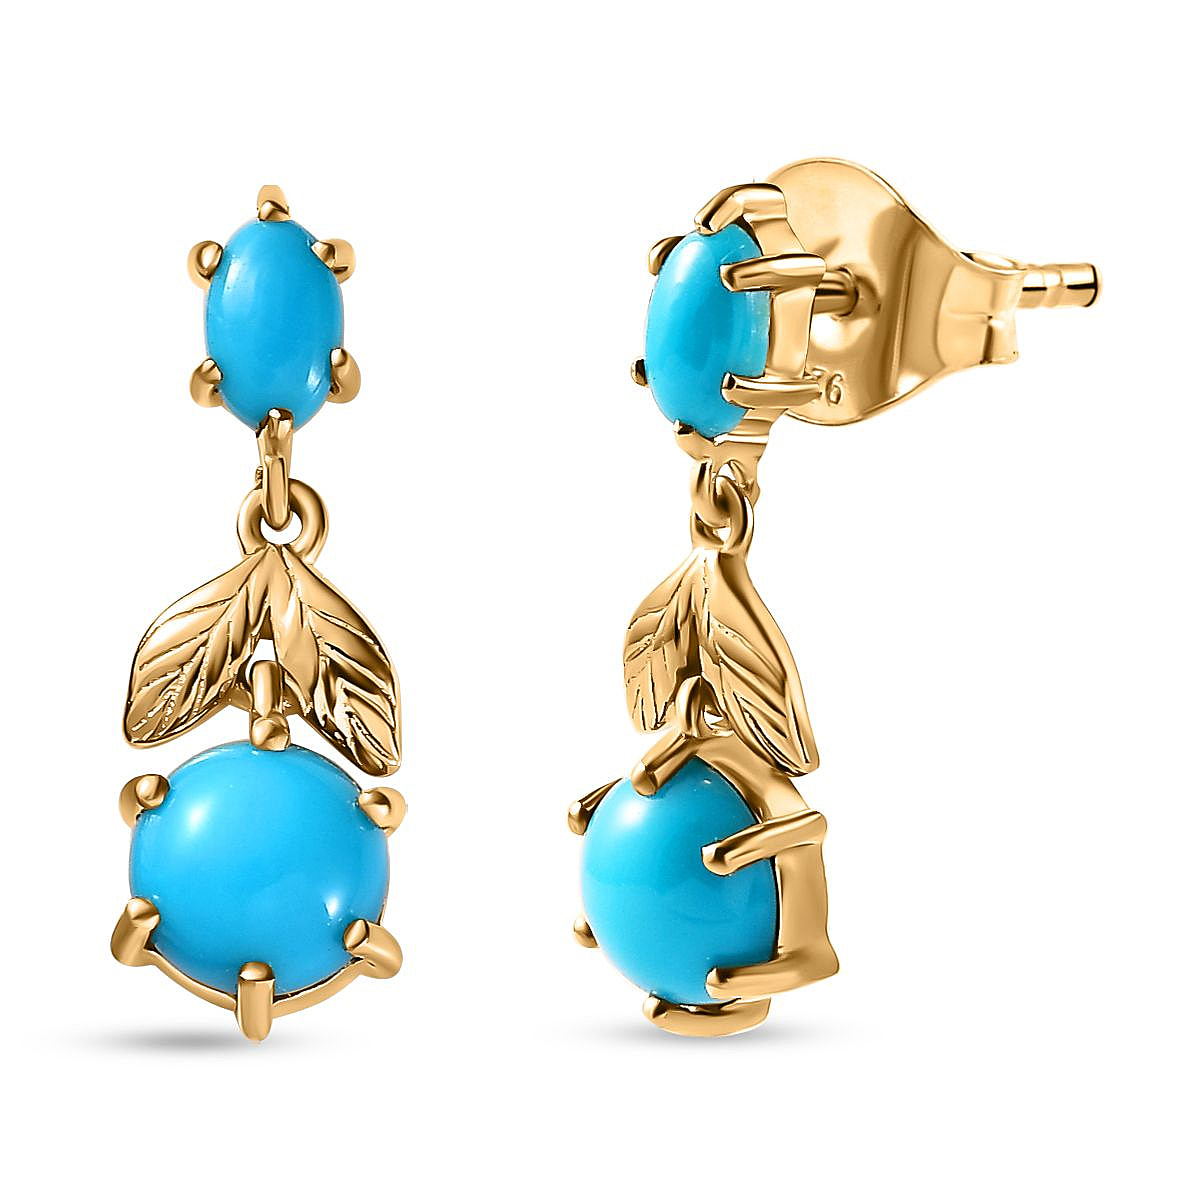 Tucson Special - Arizona Sleeping Beauty Turquoise Dangle Earrings in 18K Yellow Gold Vermeil Plated Sterling Silver 2.46 Ct.